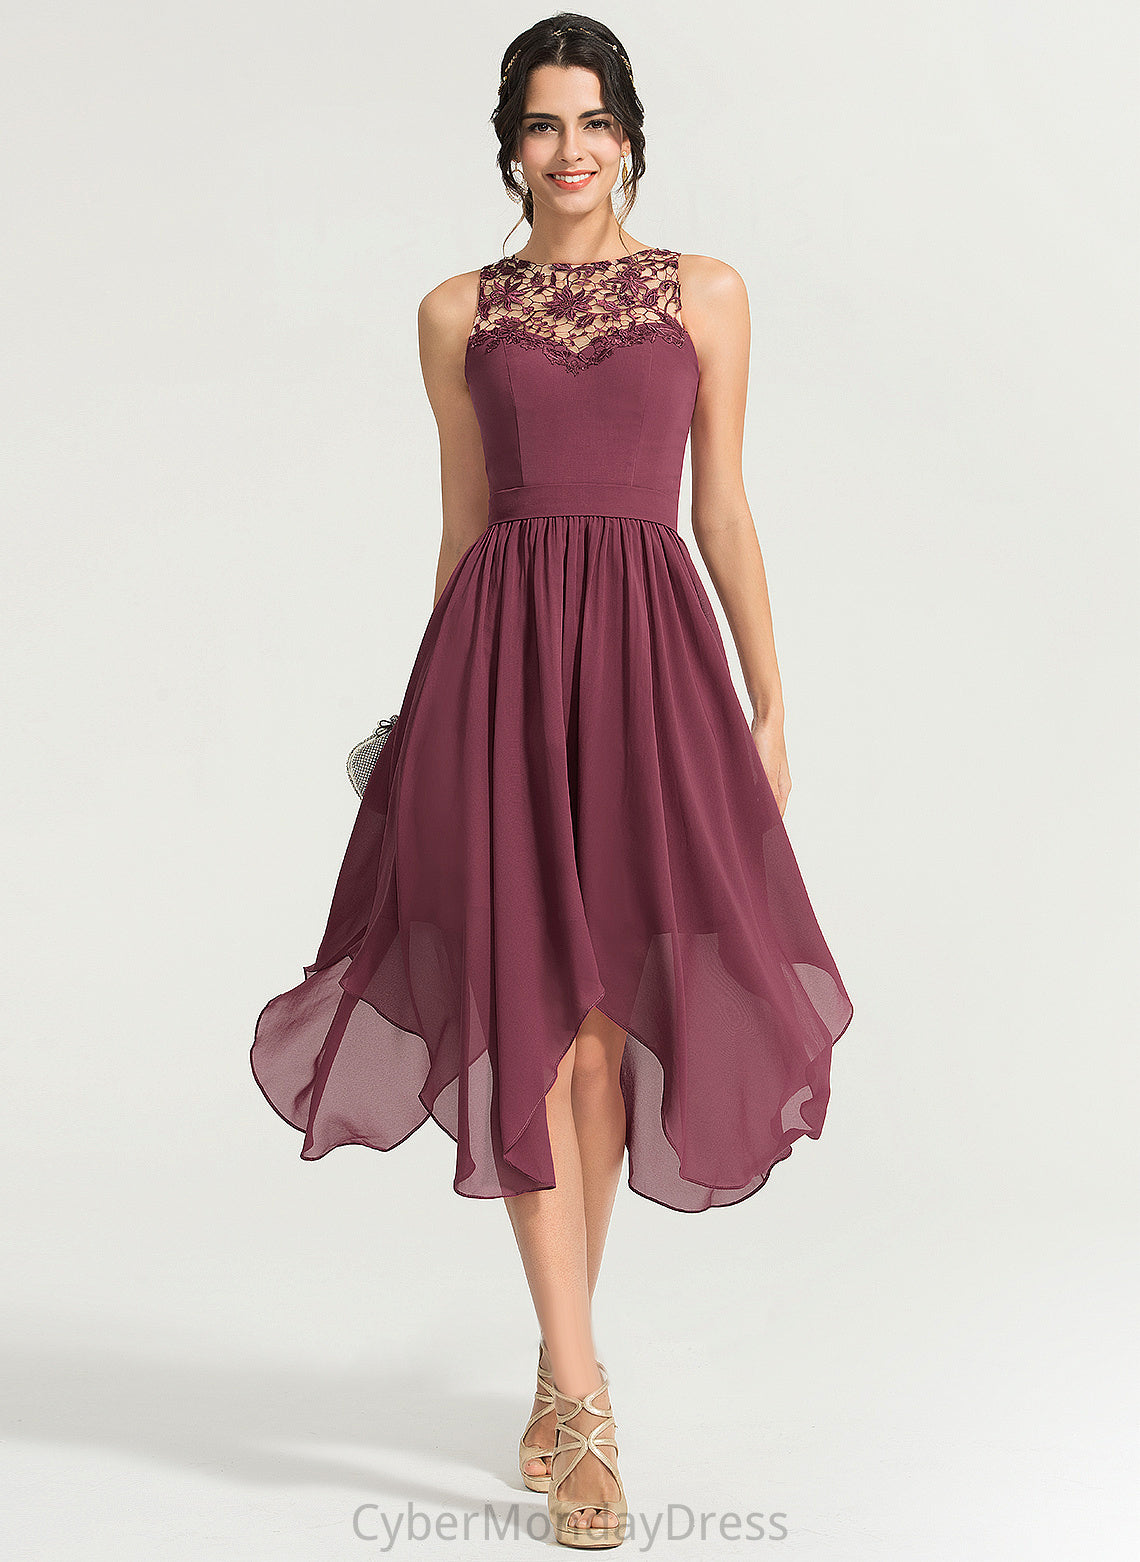 A-Line Lace Cocktail Dresses Asymmetrical Scoop Chiffon Dress Neck Marlee Cocktail